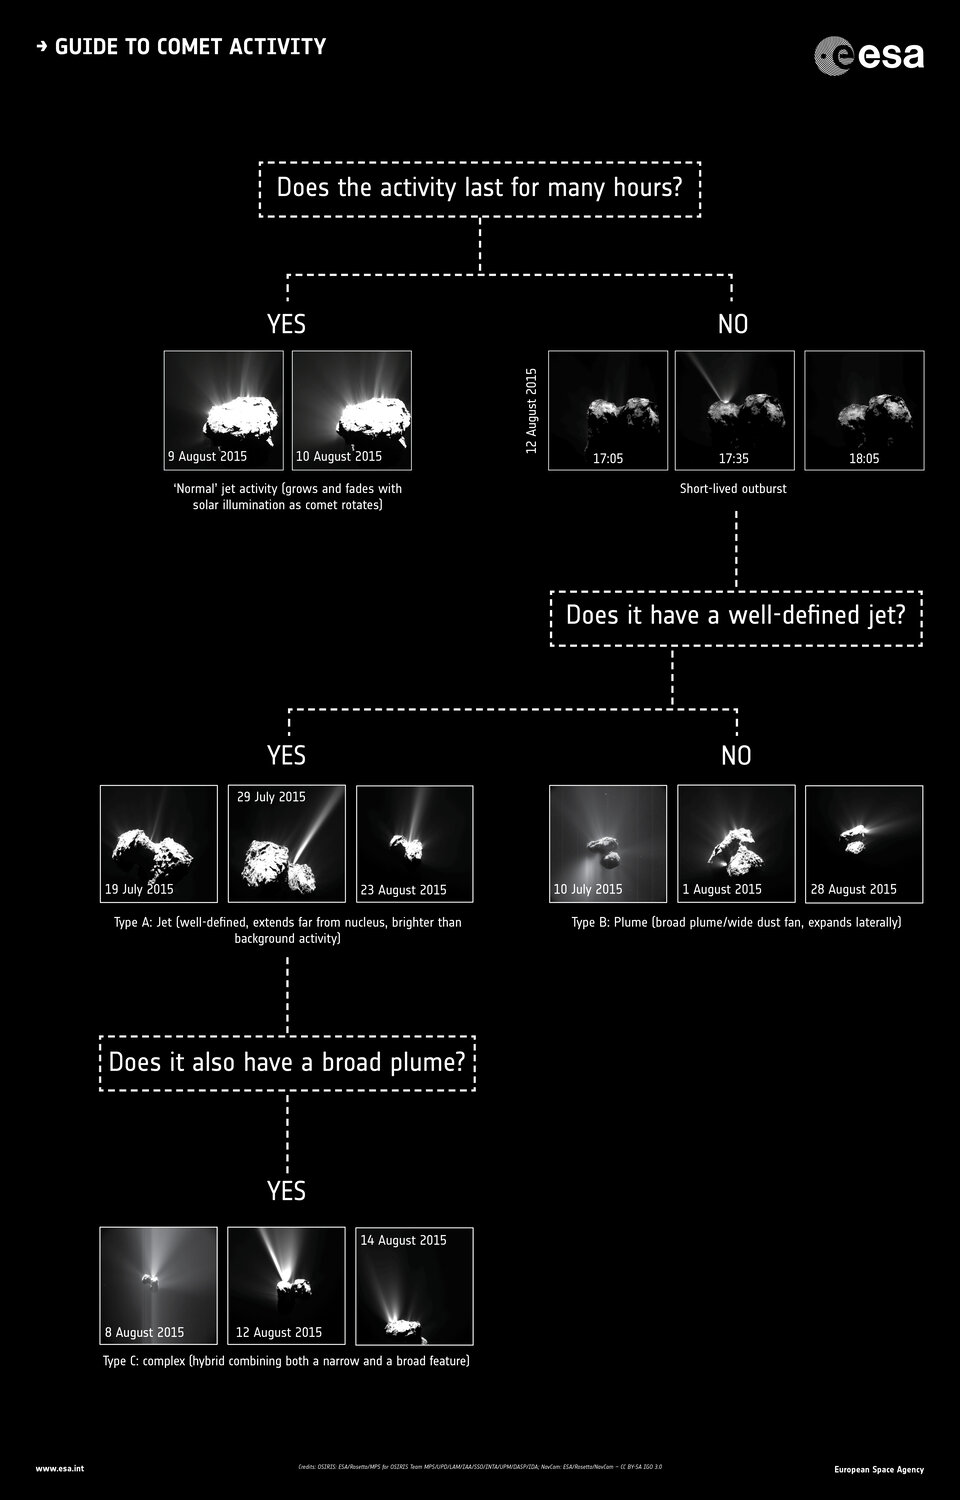 Guide to comet activity